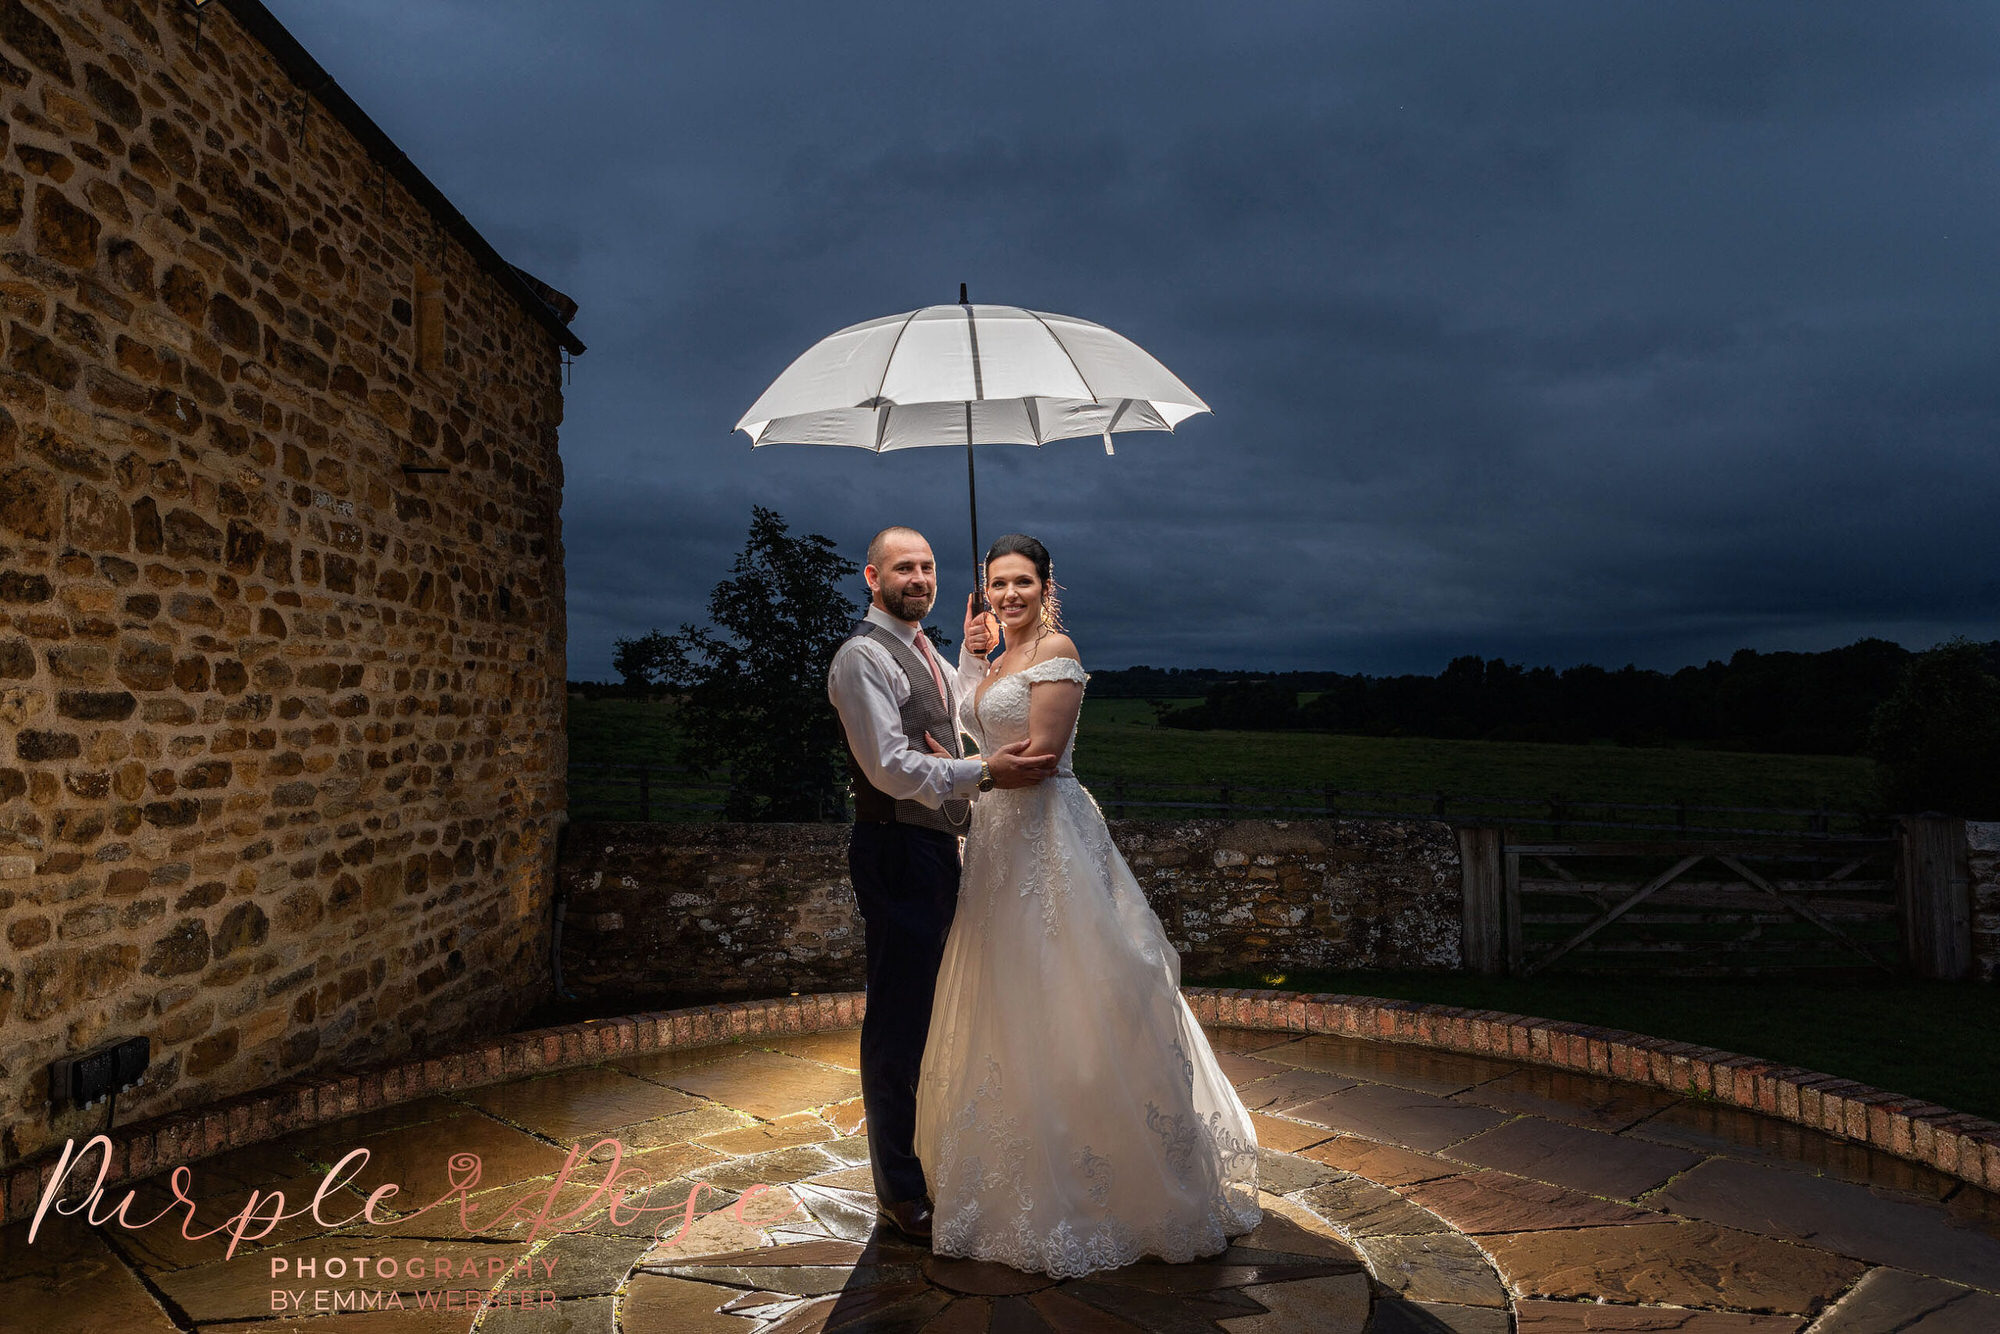 Night time photo of bride and groom under an umbrella at their wedding in Northampton